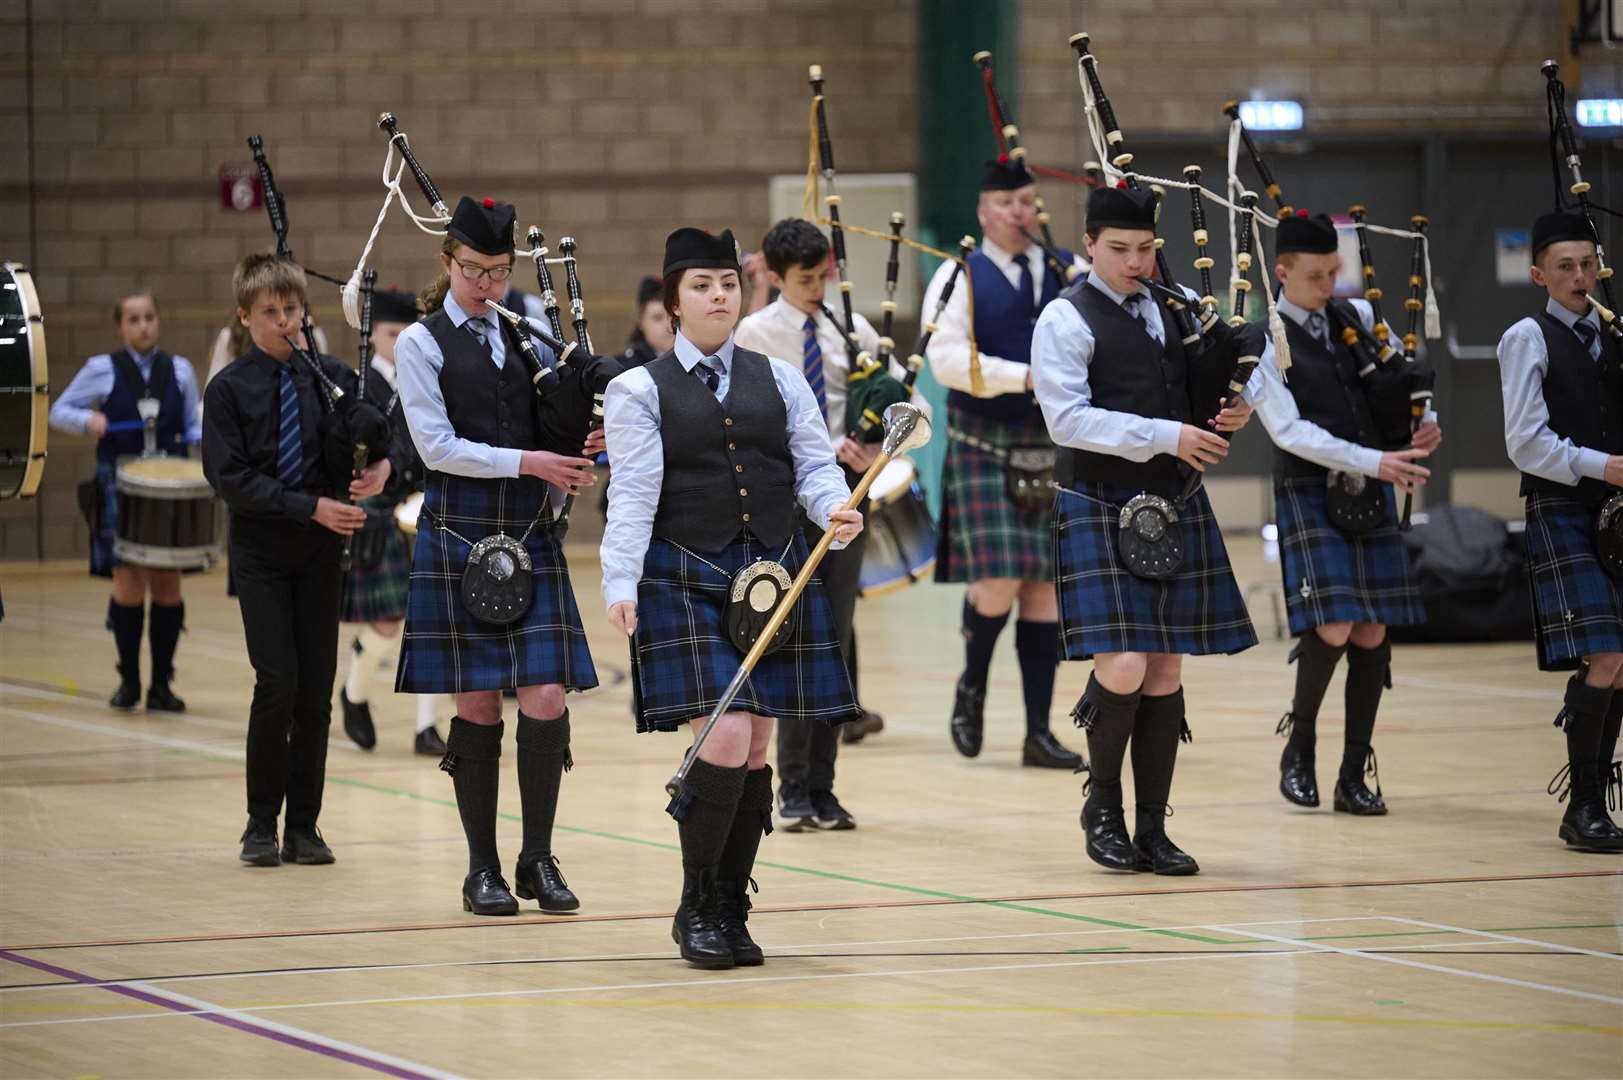 Beating Retreat event at Inverness Leisure Centre on Sunday.